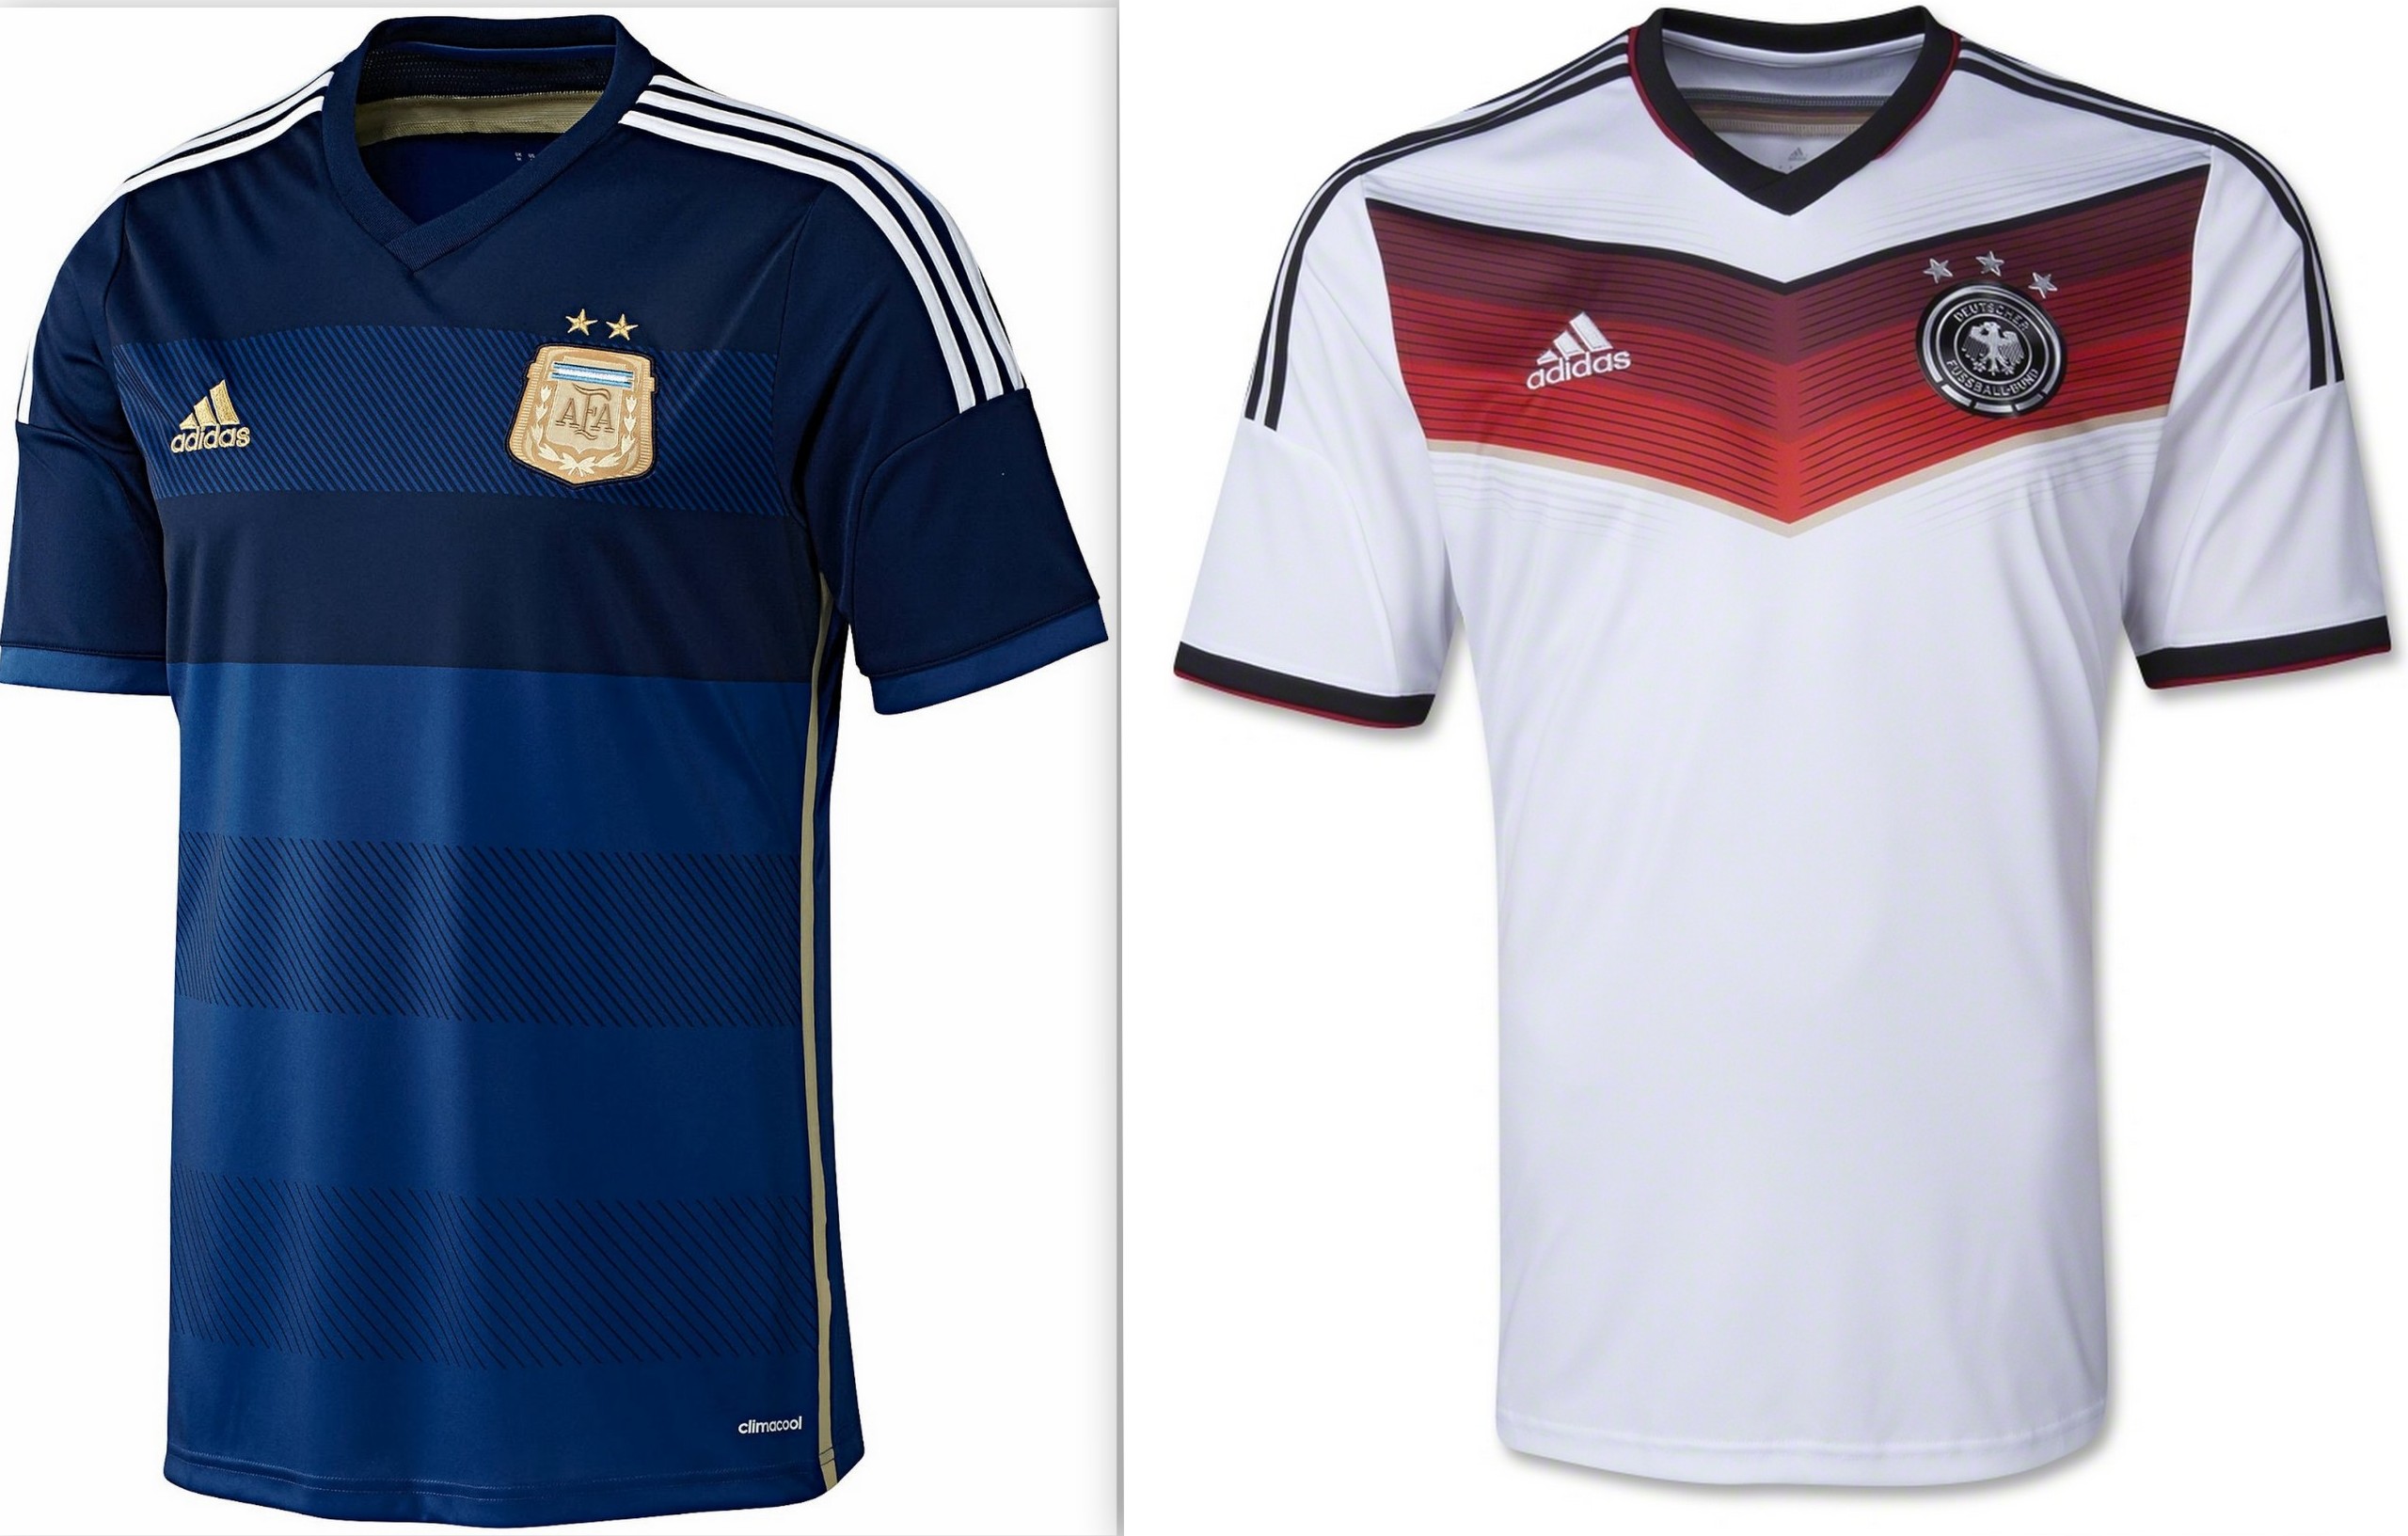 FIFA World Cup 2014: Argentina to play for the first time in their away